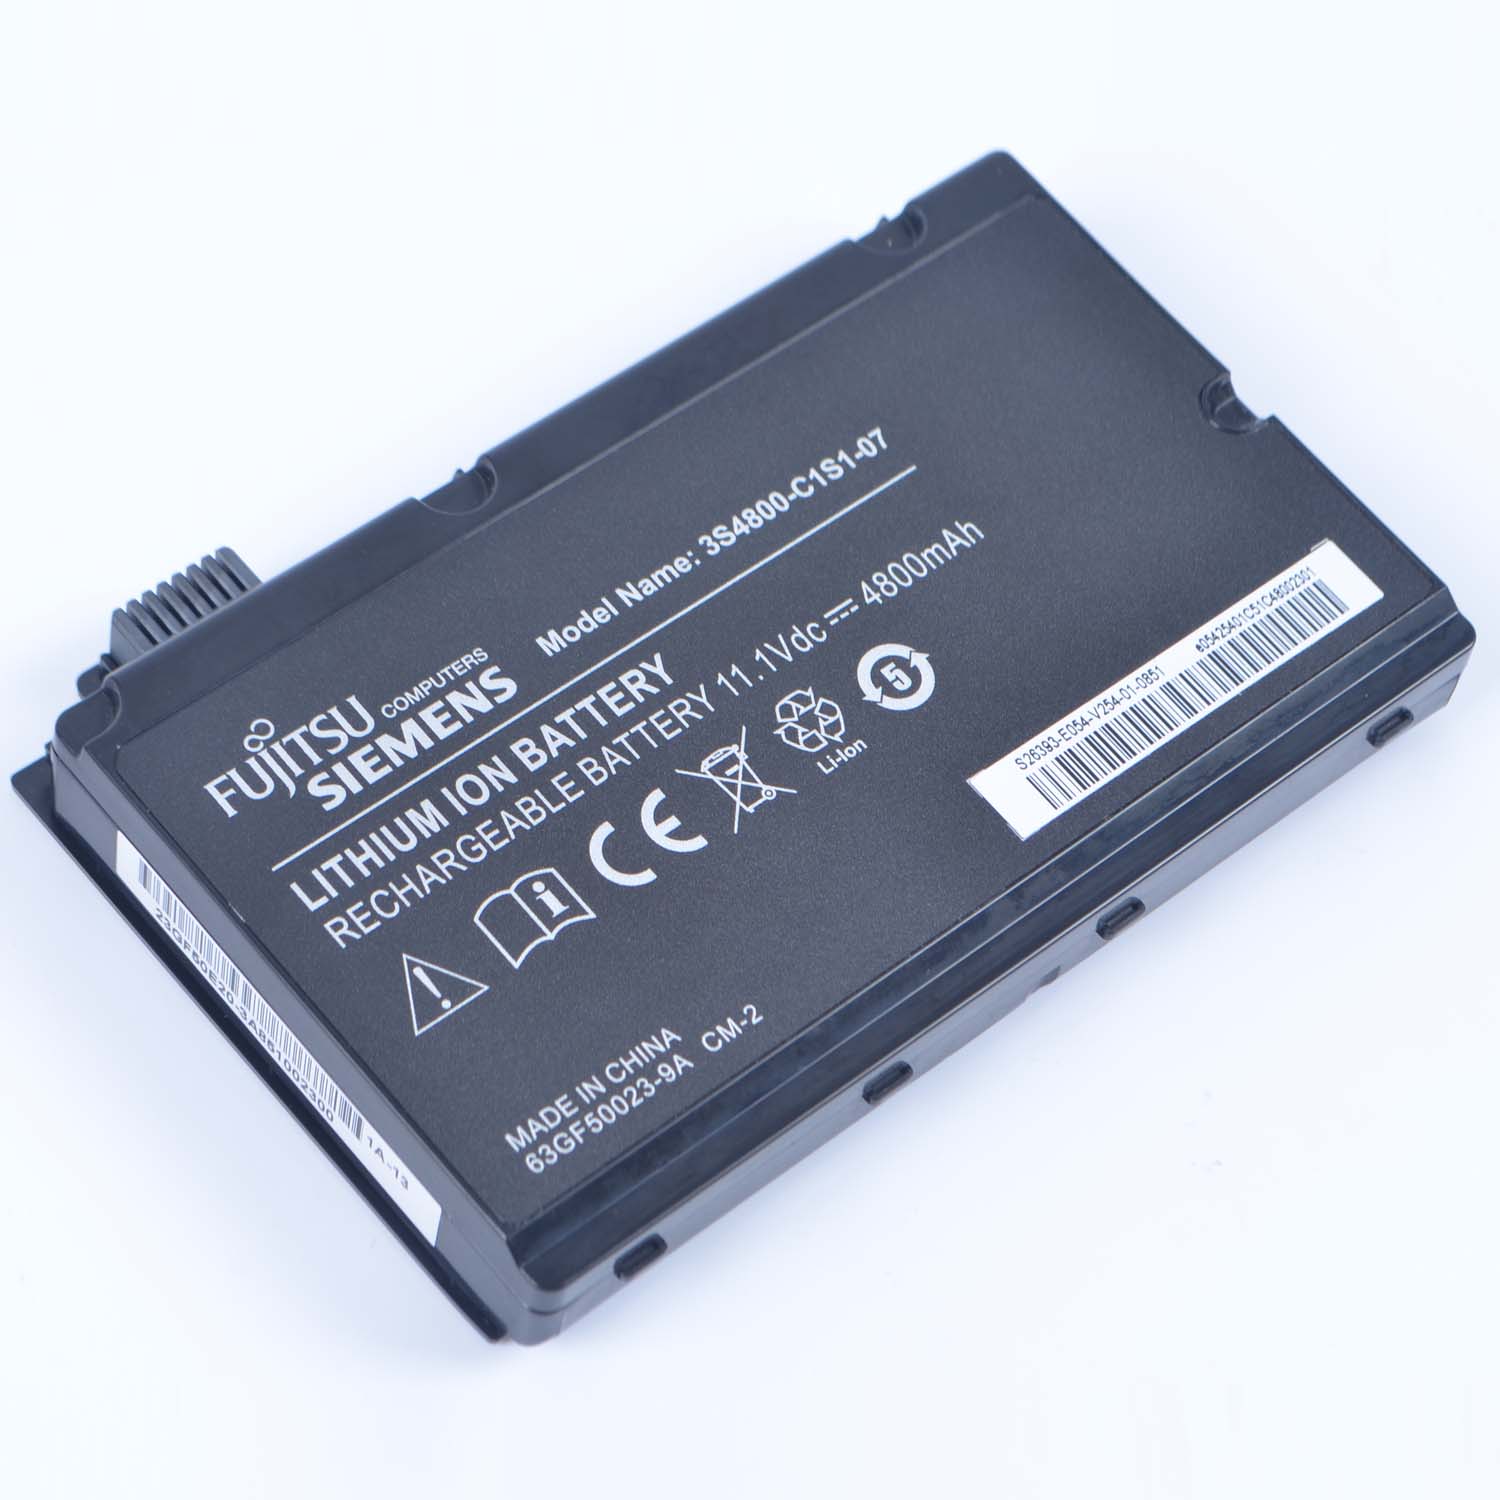 Replacement Battery for FUJITSU 3S4400-S3S6-07 battery